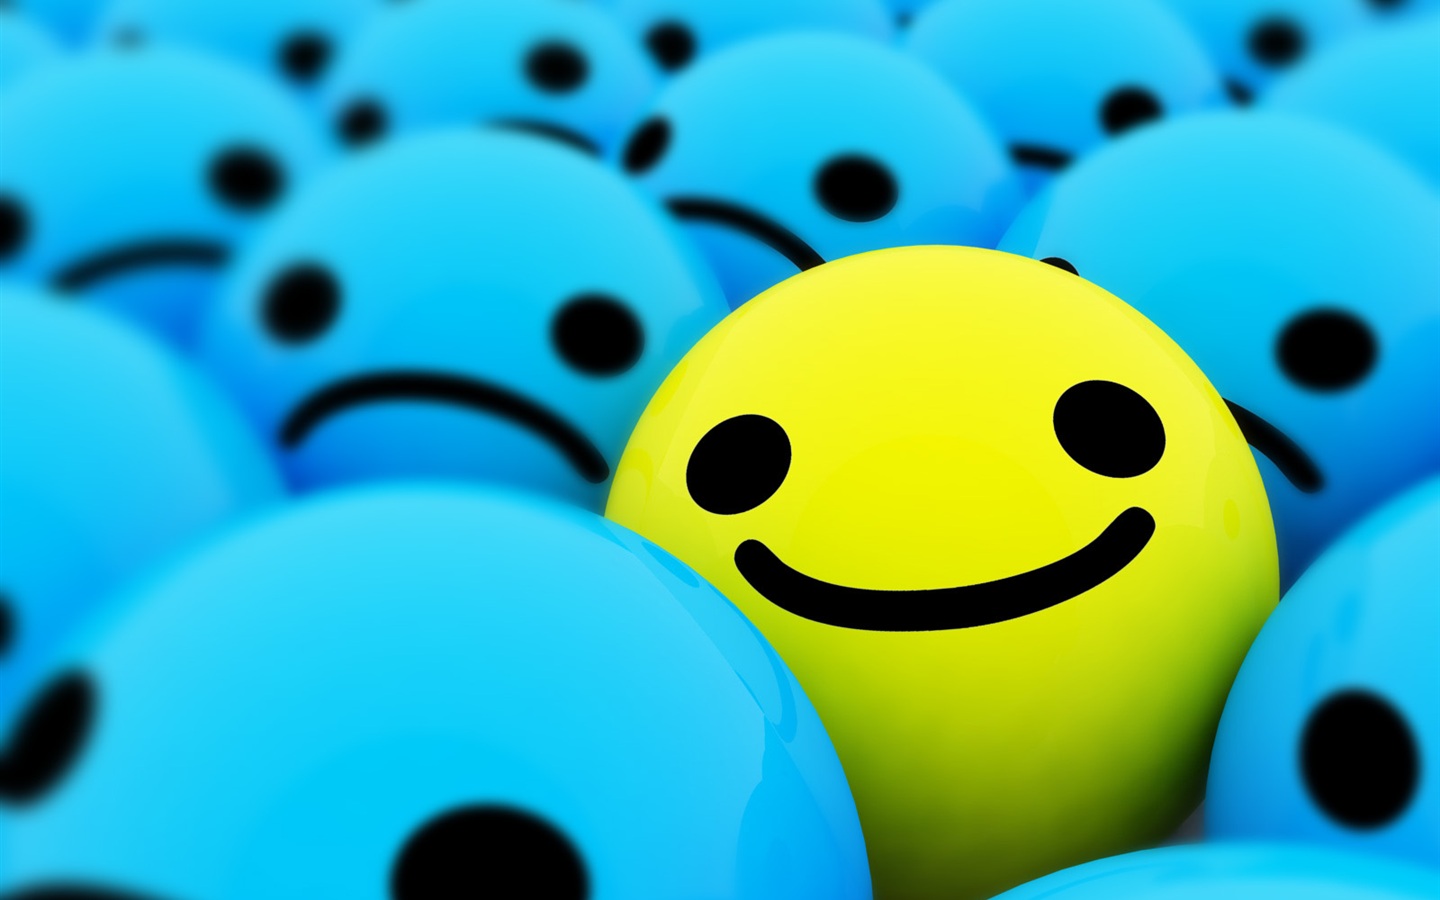 Smiling Faces Images - Clipart library